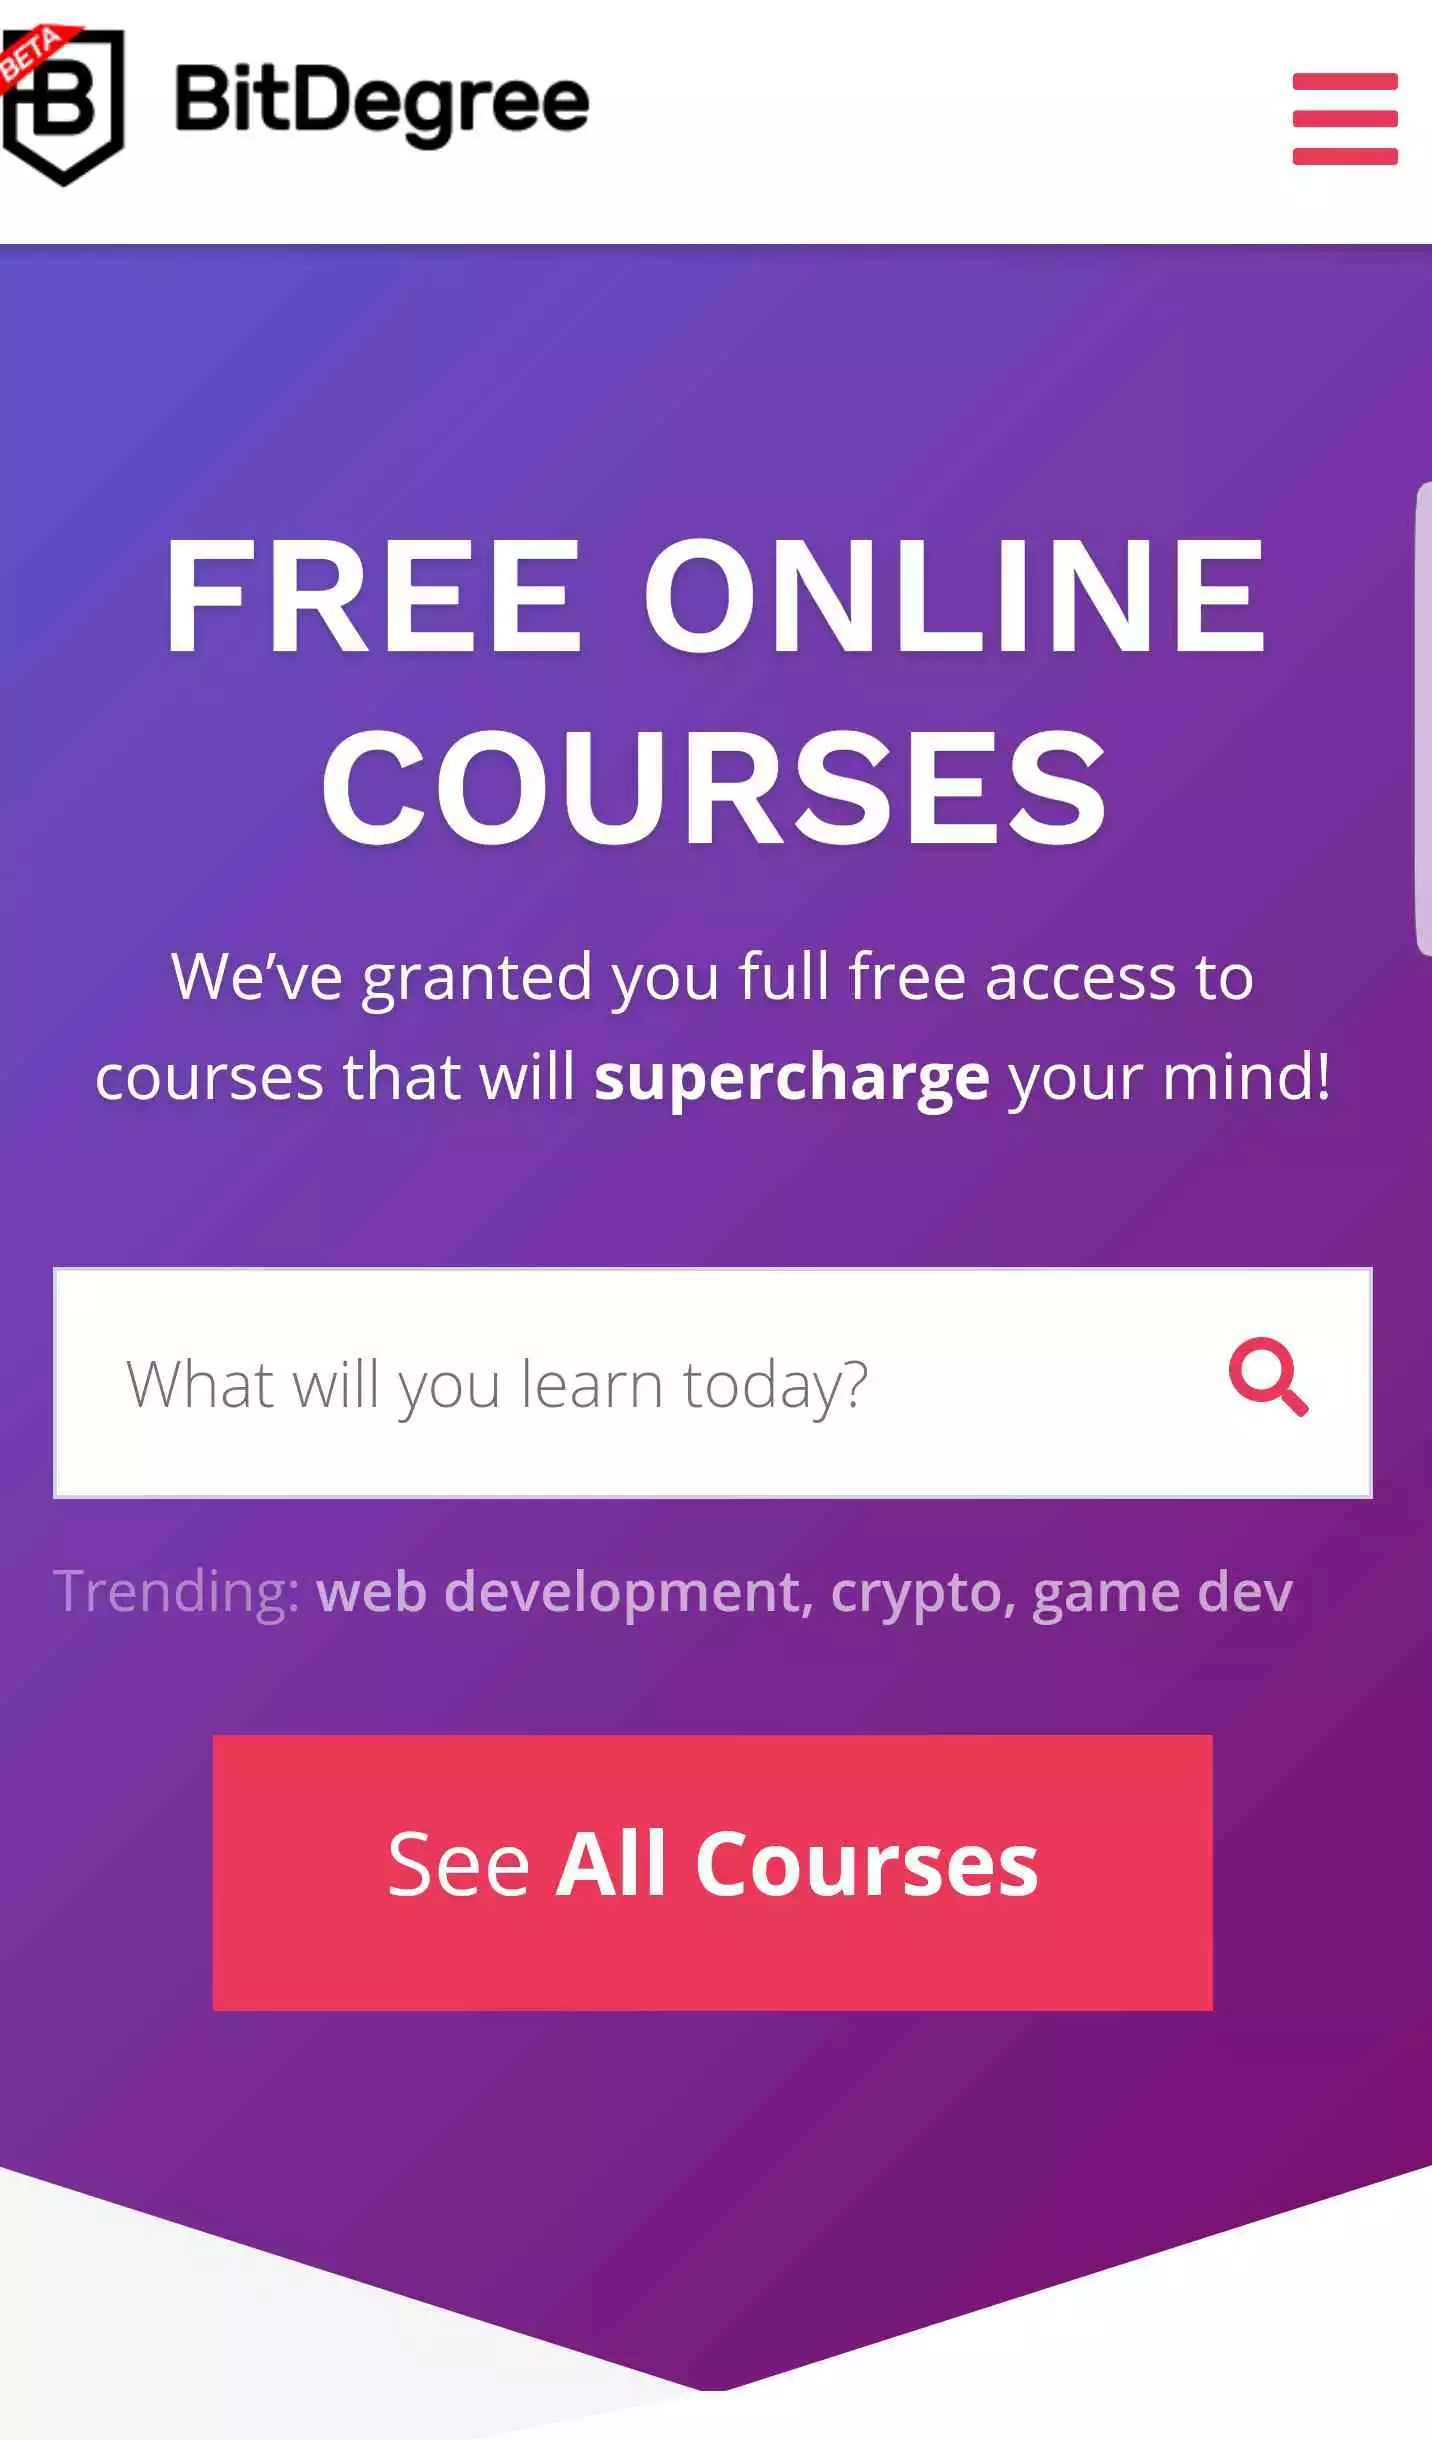 Play Free Online Courses | BitDegree  and enjoy Free Online Courses | BitDegree with UptoPlay